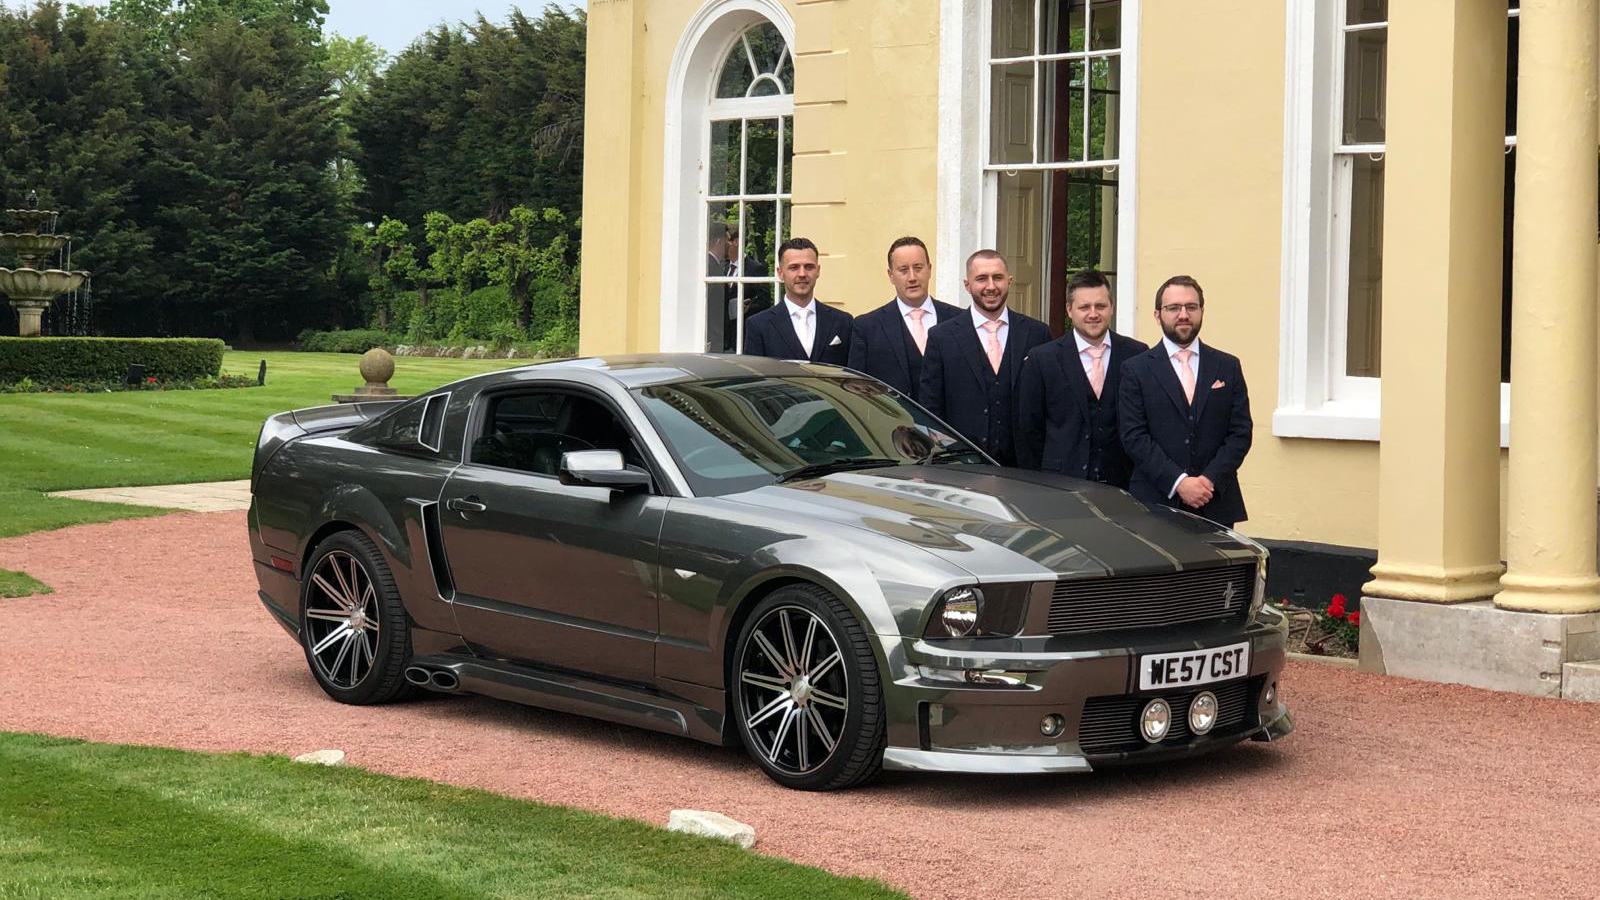 Grey Ford Mustang V8 parked in front of a wedding venue with Groom and his Bestmen standing behind the vehicle.